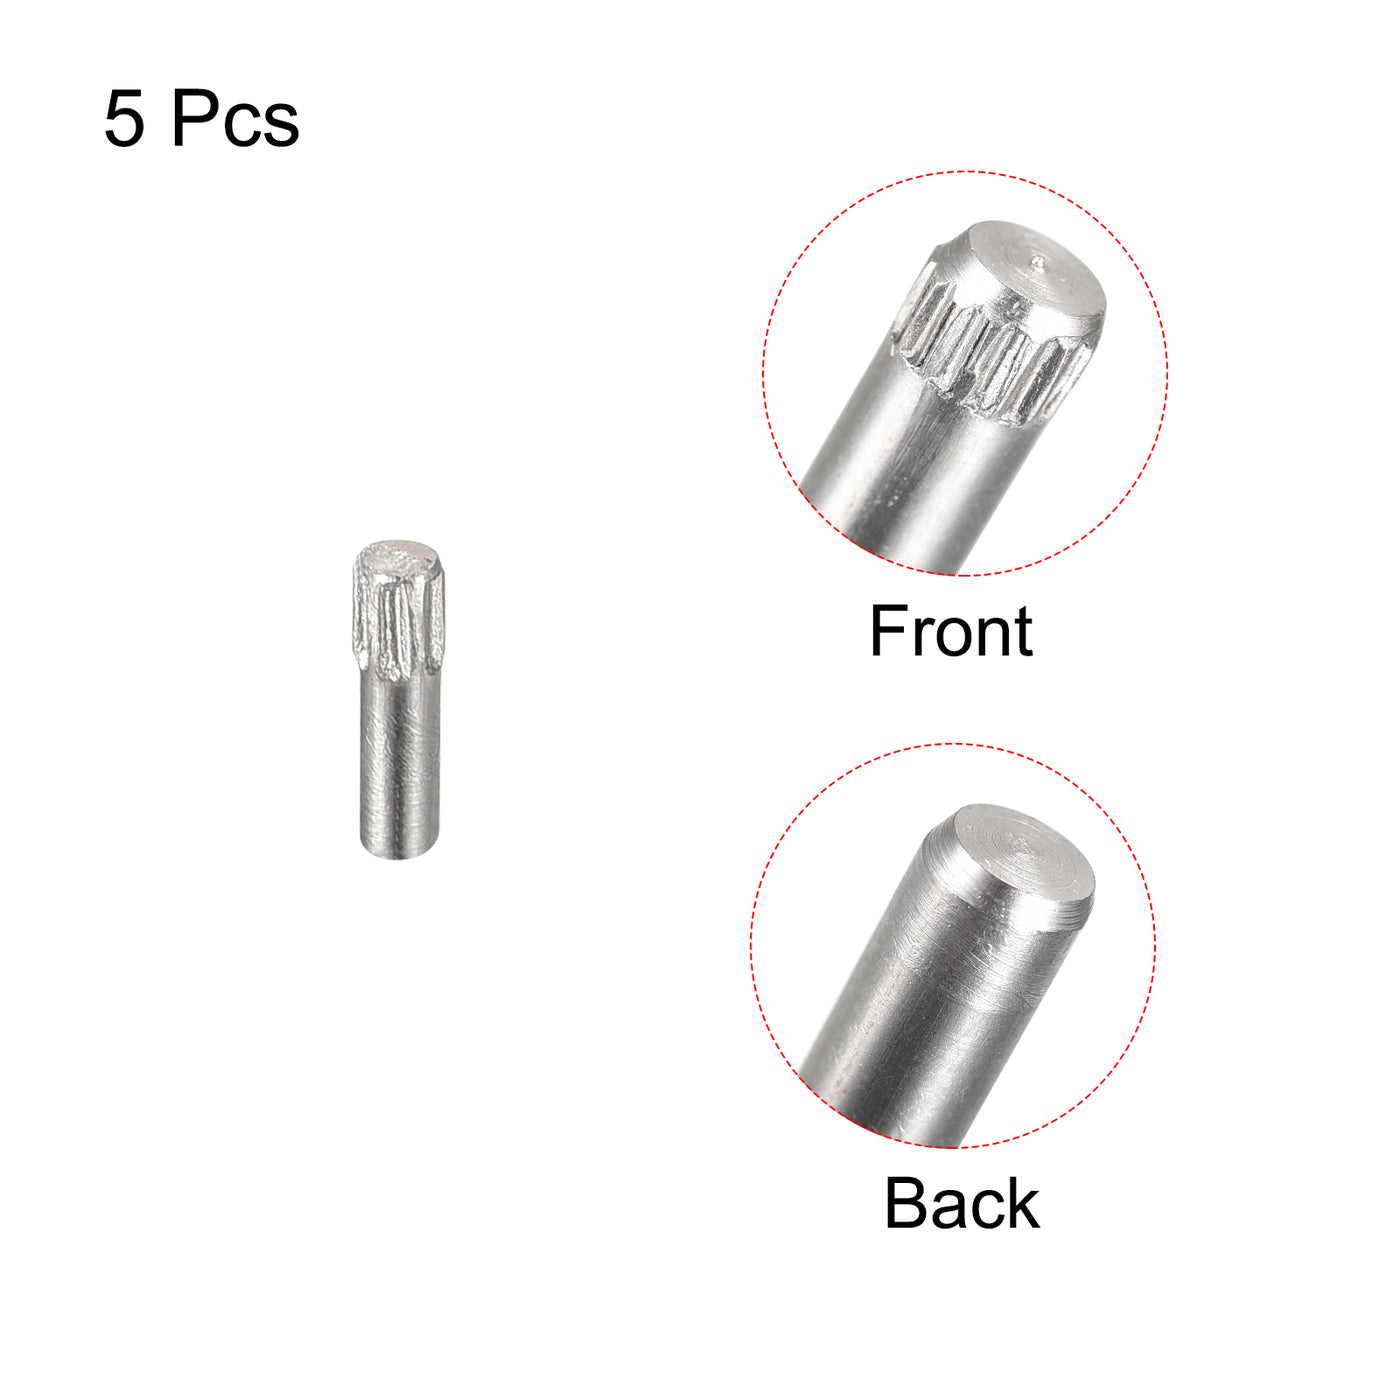 uxcell Uxcell 1.5x6mm 304 Stainless Steel Dowel Pins, 5Pcs Knurled Head Flat End Dowel Pin